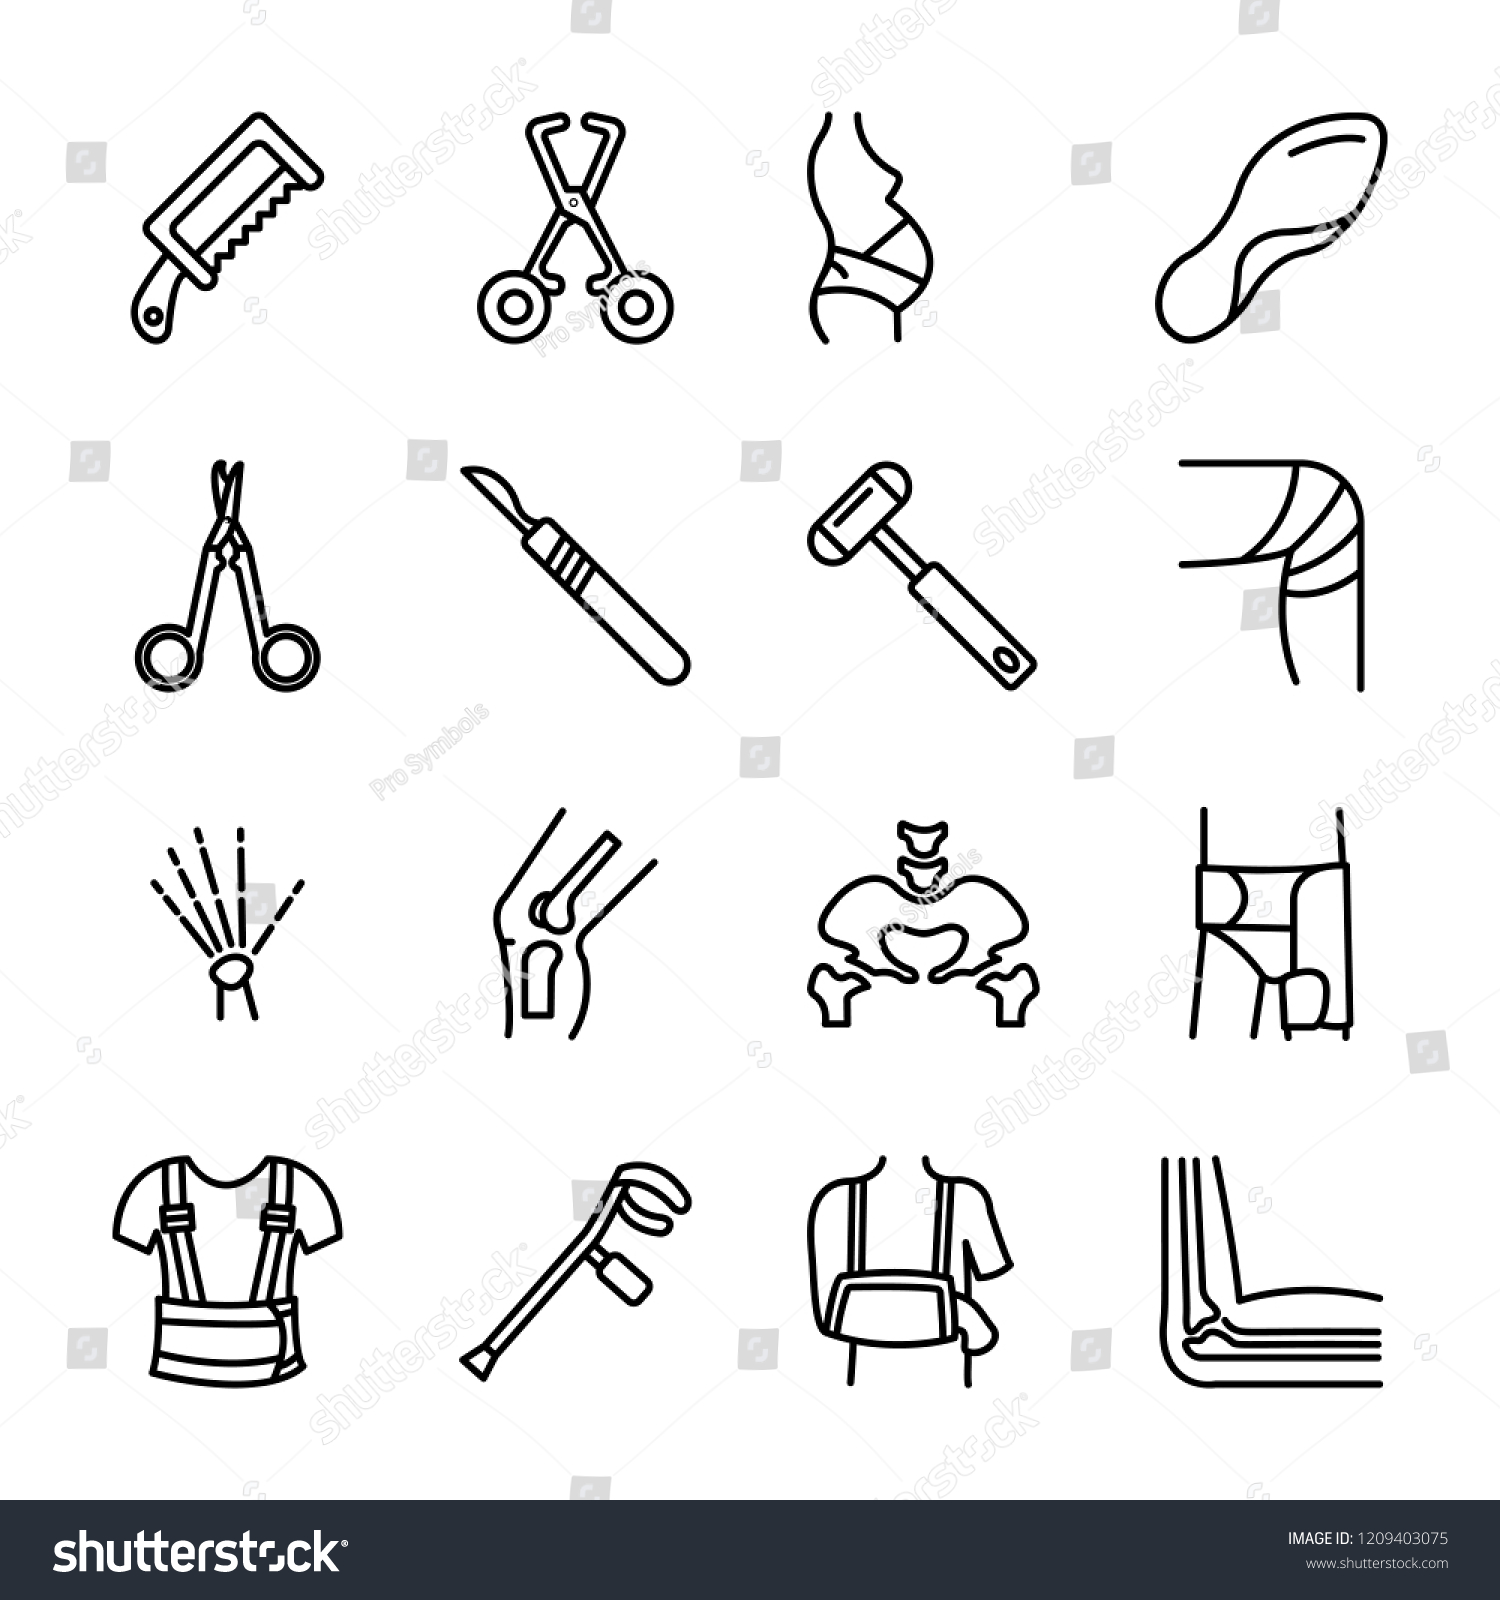 SVG of Medical supplies icons svg